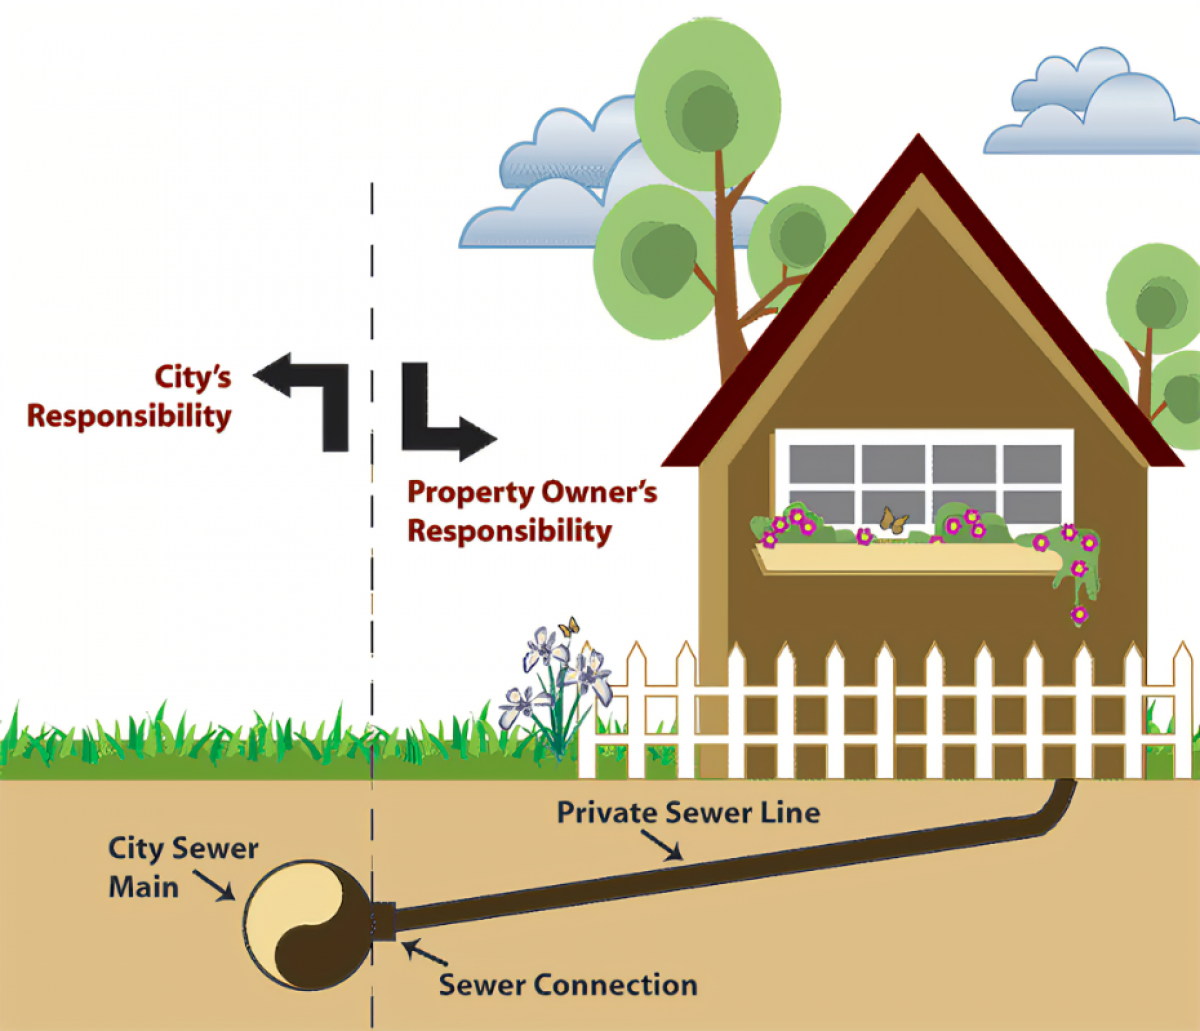 Reponsibility of City and Property Owner - Sewer Lines Only